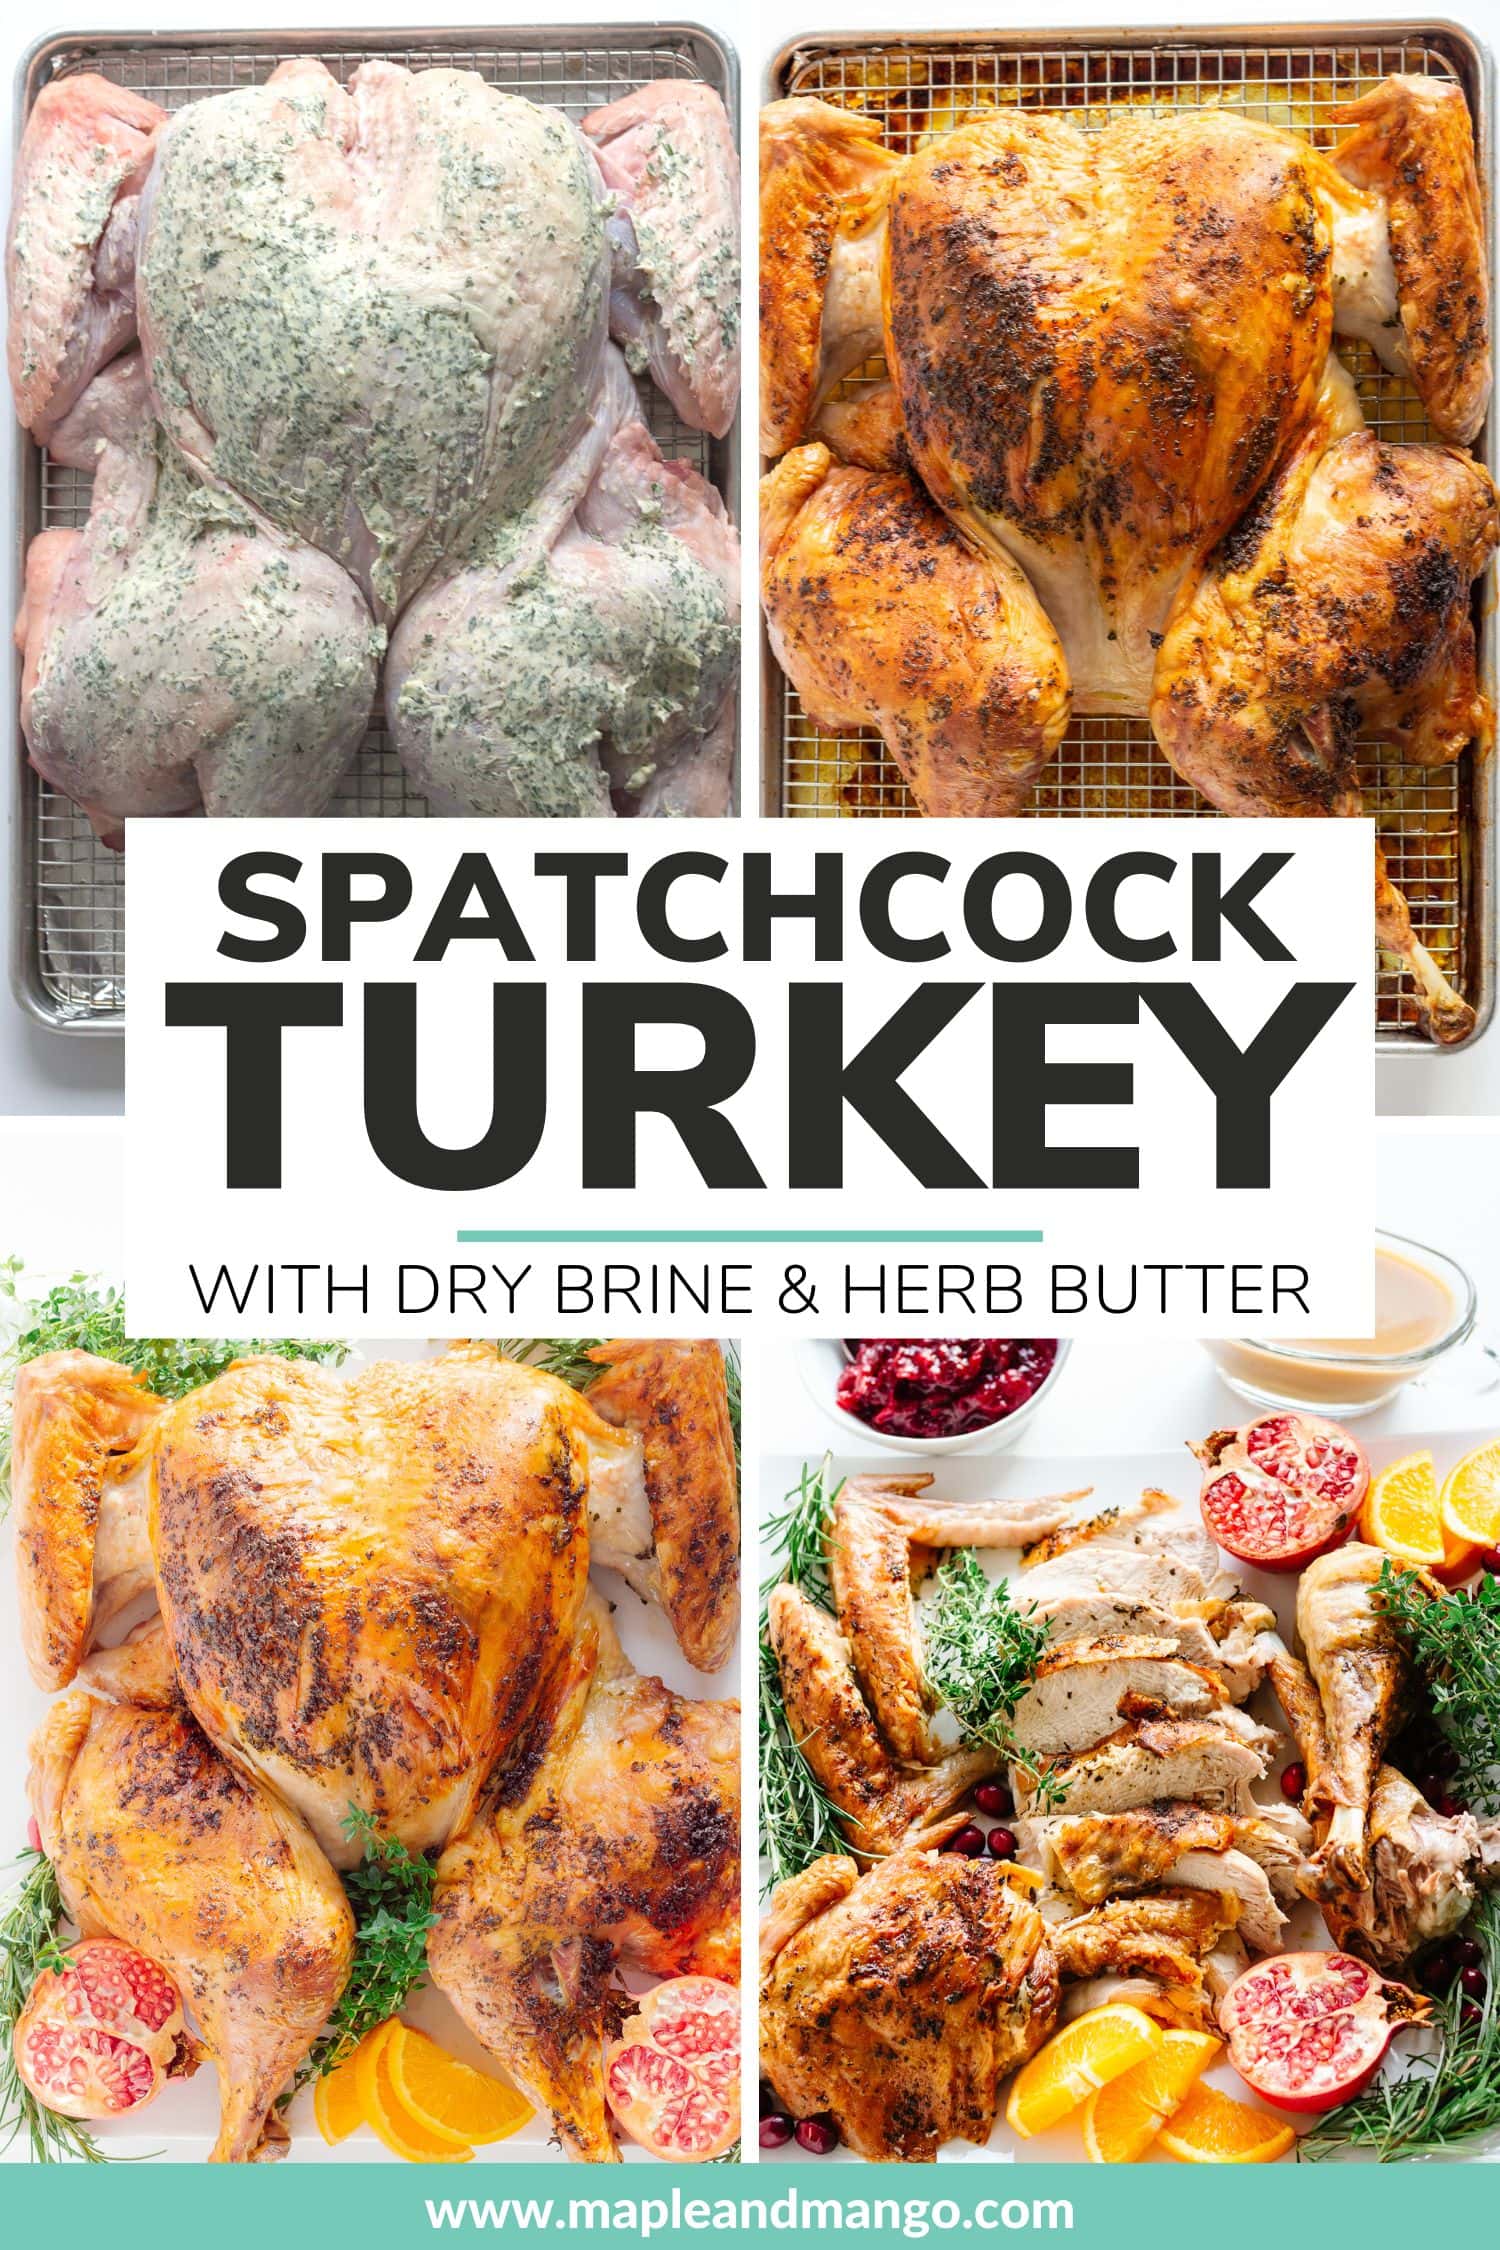 Photo collage pinterest graphic for Spatchcock Turkey With Dry Brine & Herb Butter.